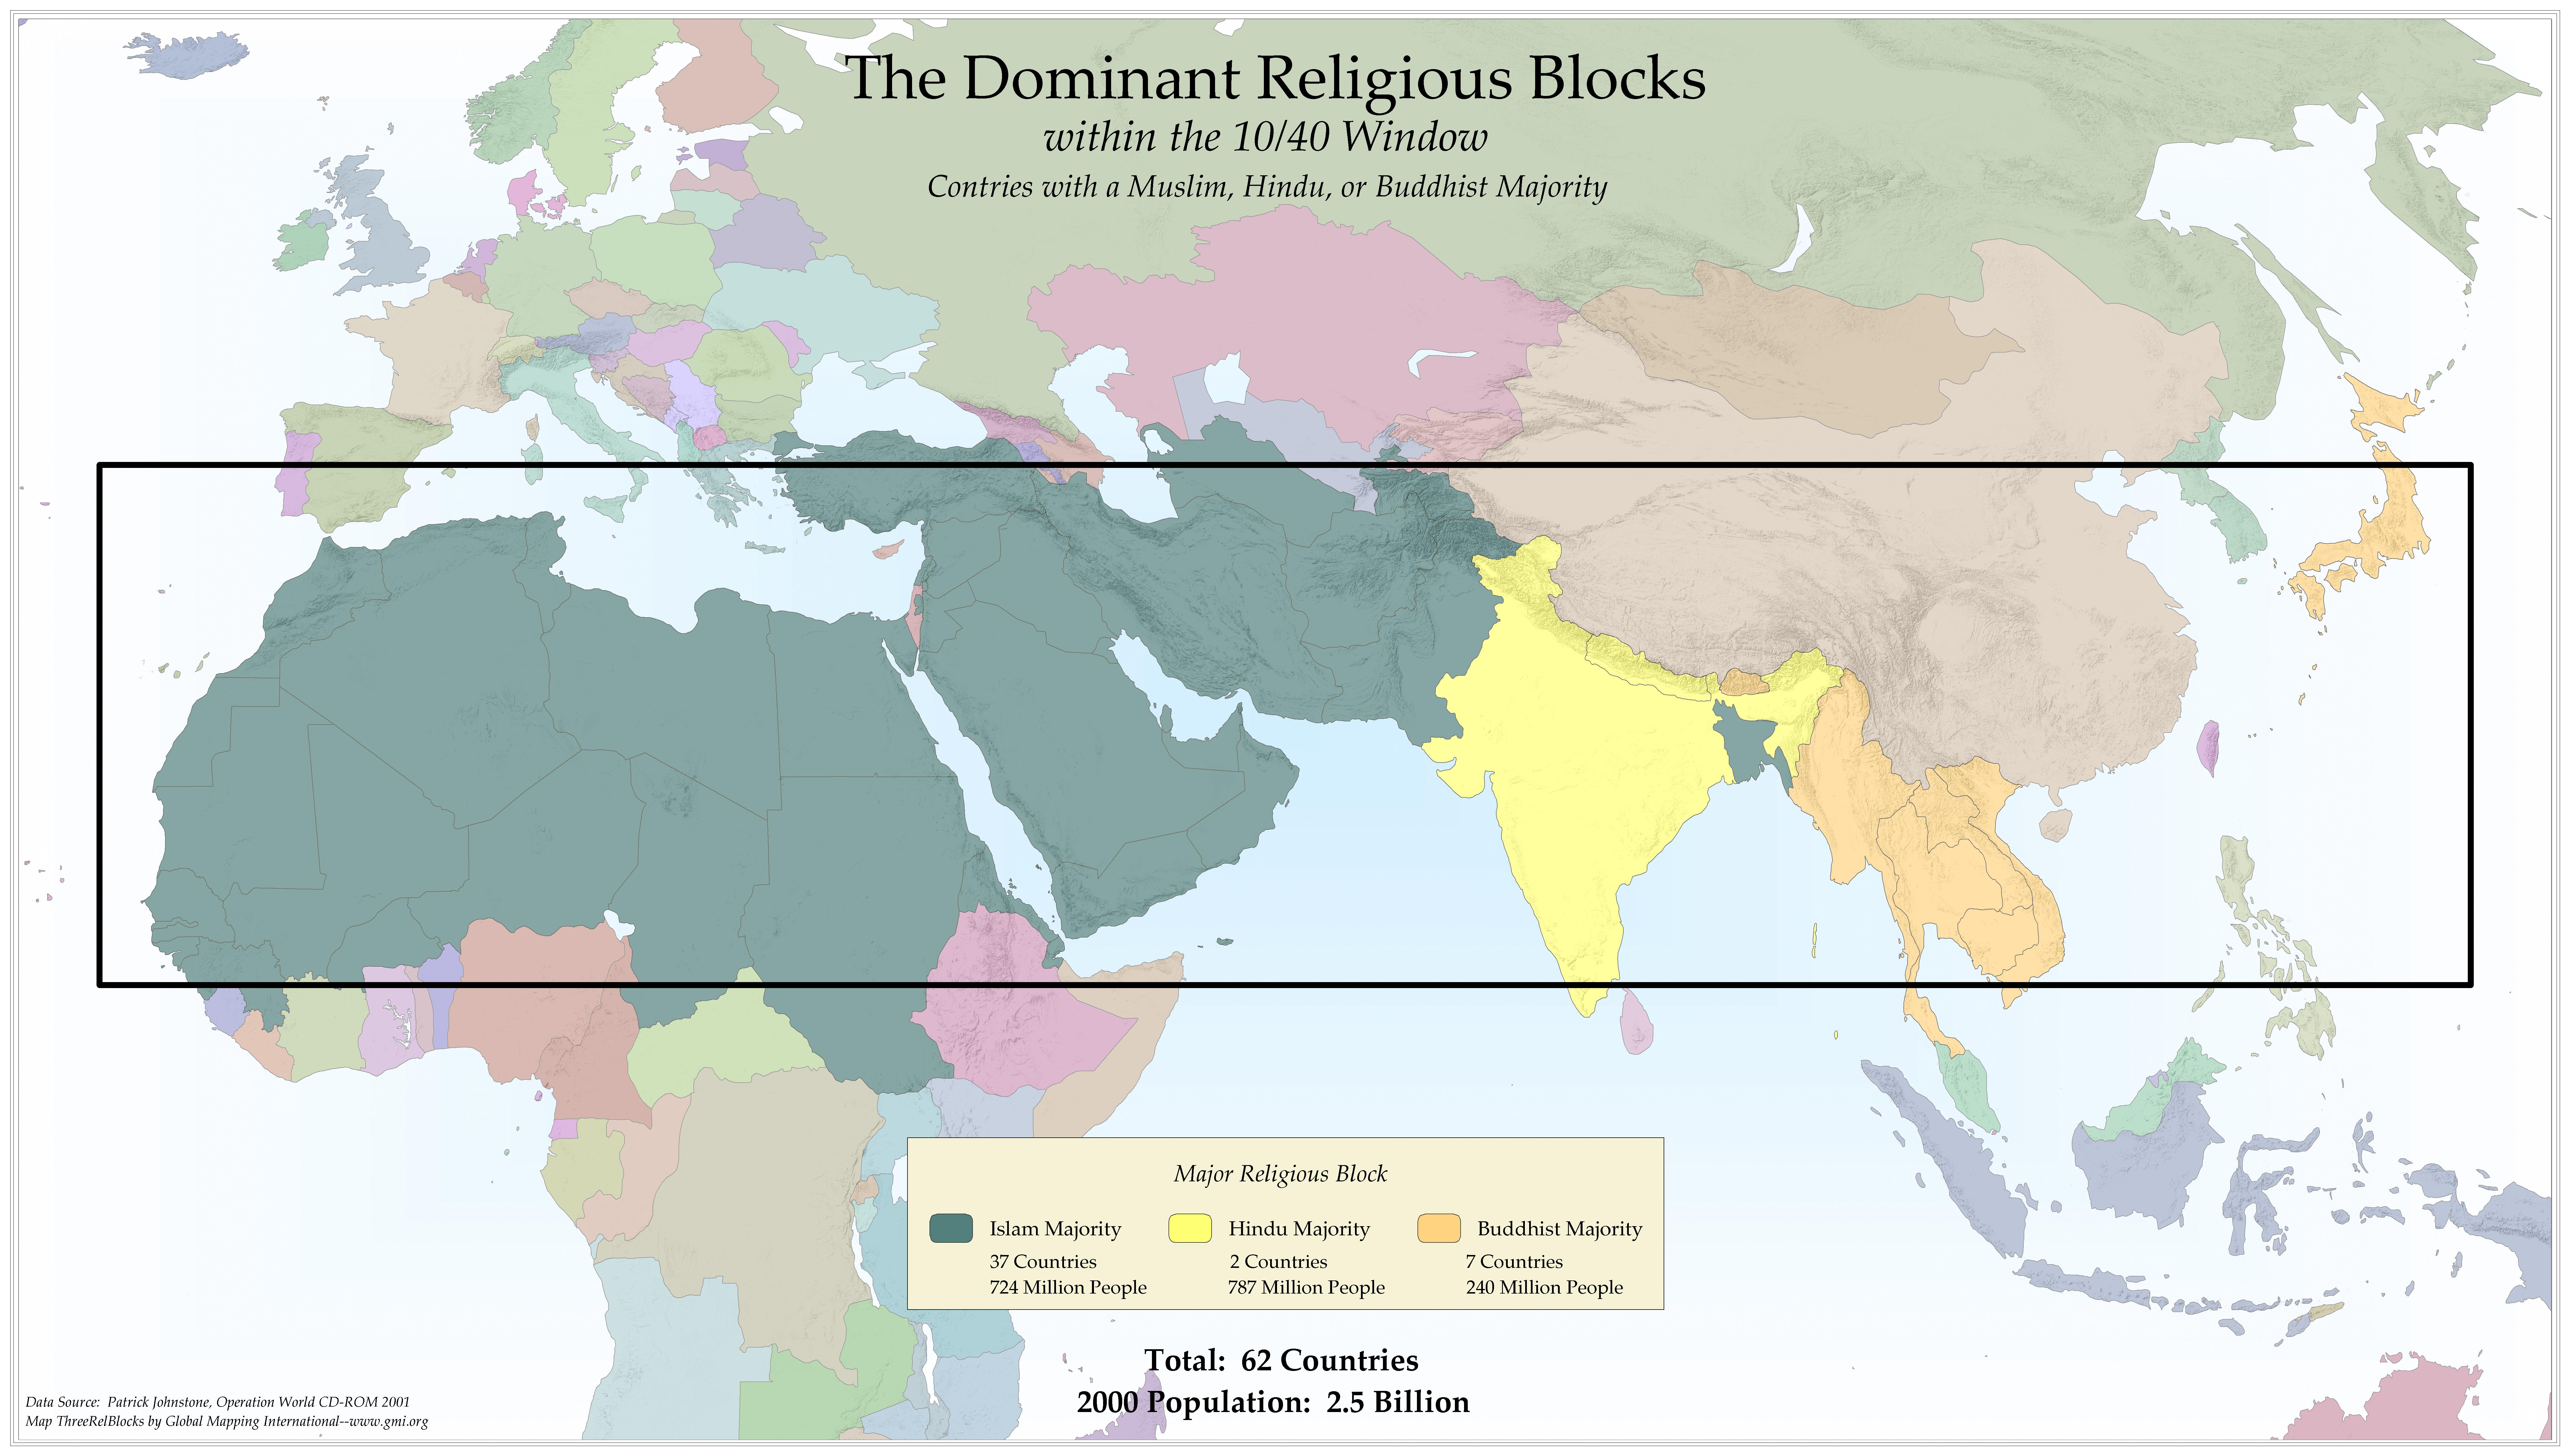 The Dominent Religious Blocks within The 10/40 Window